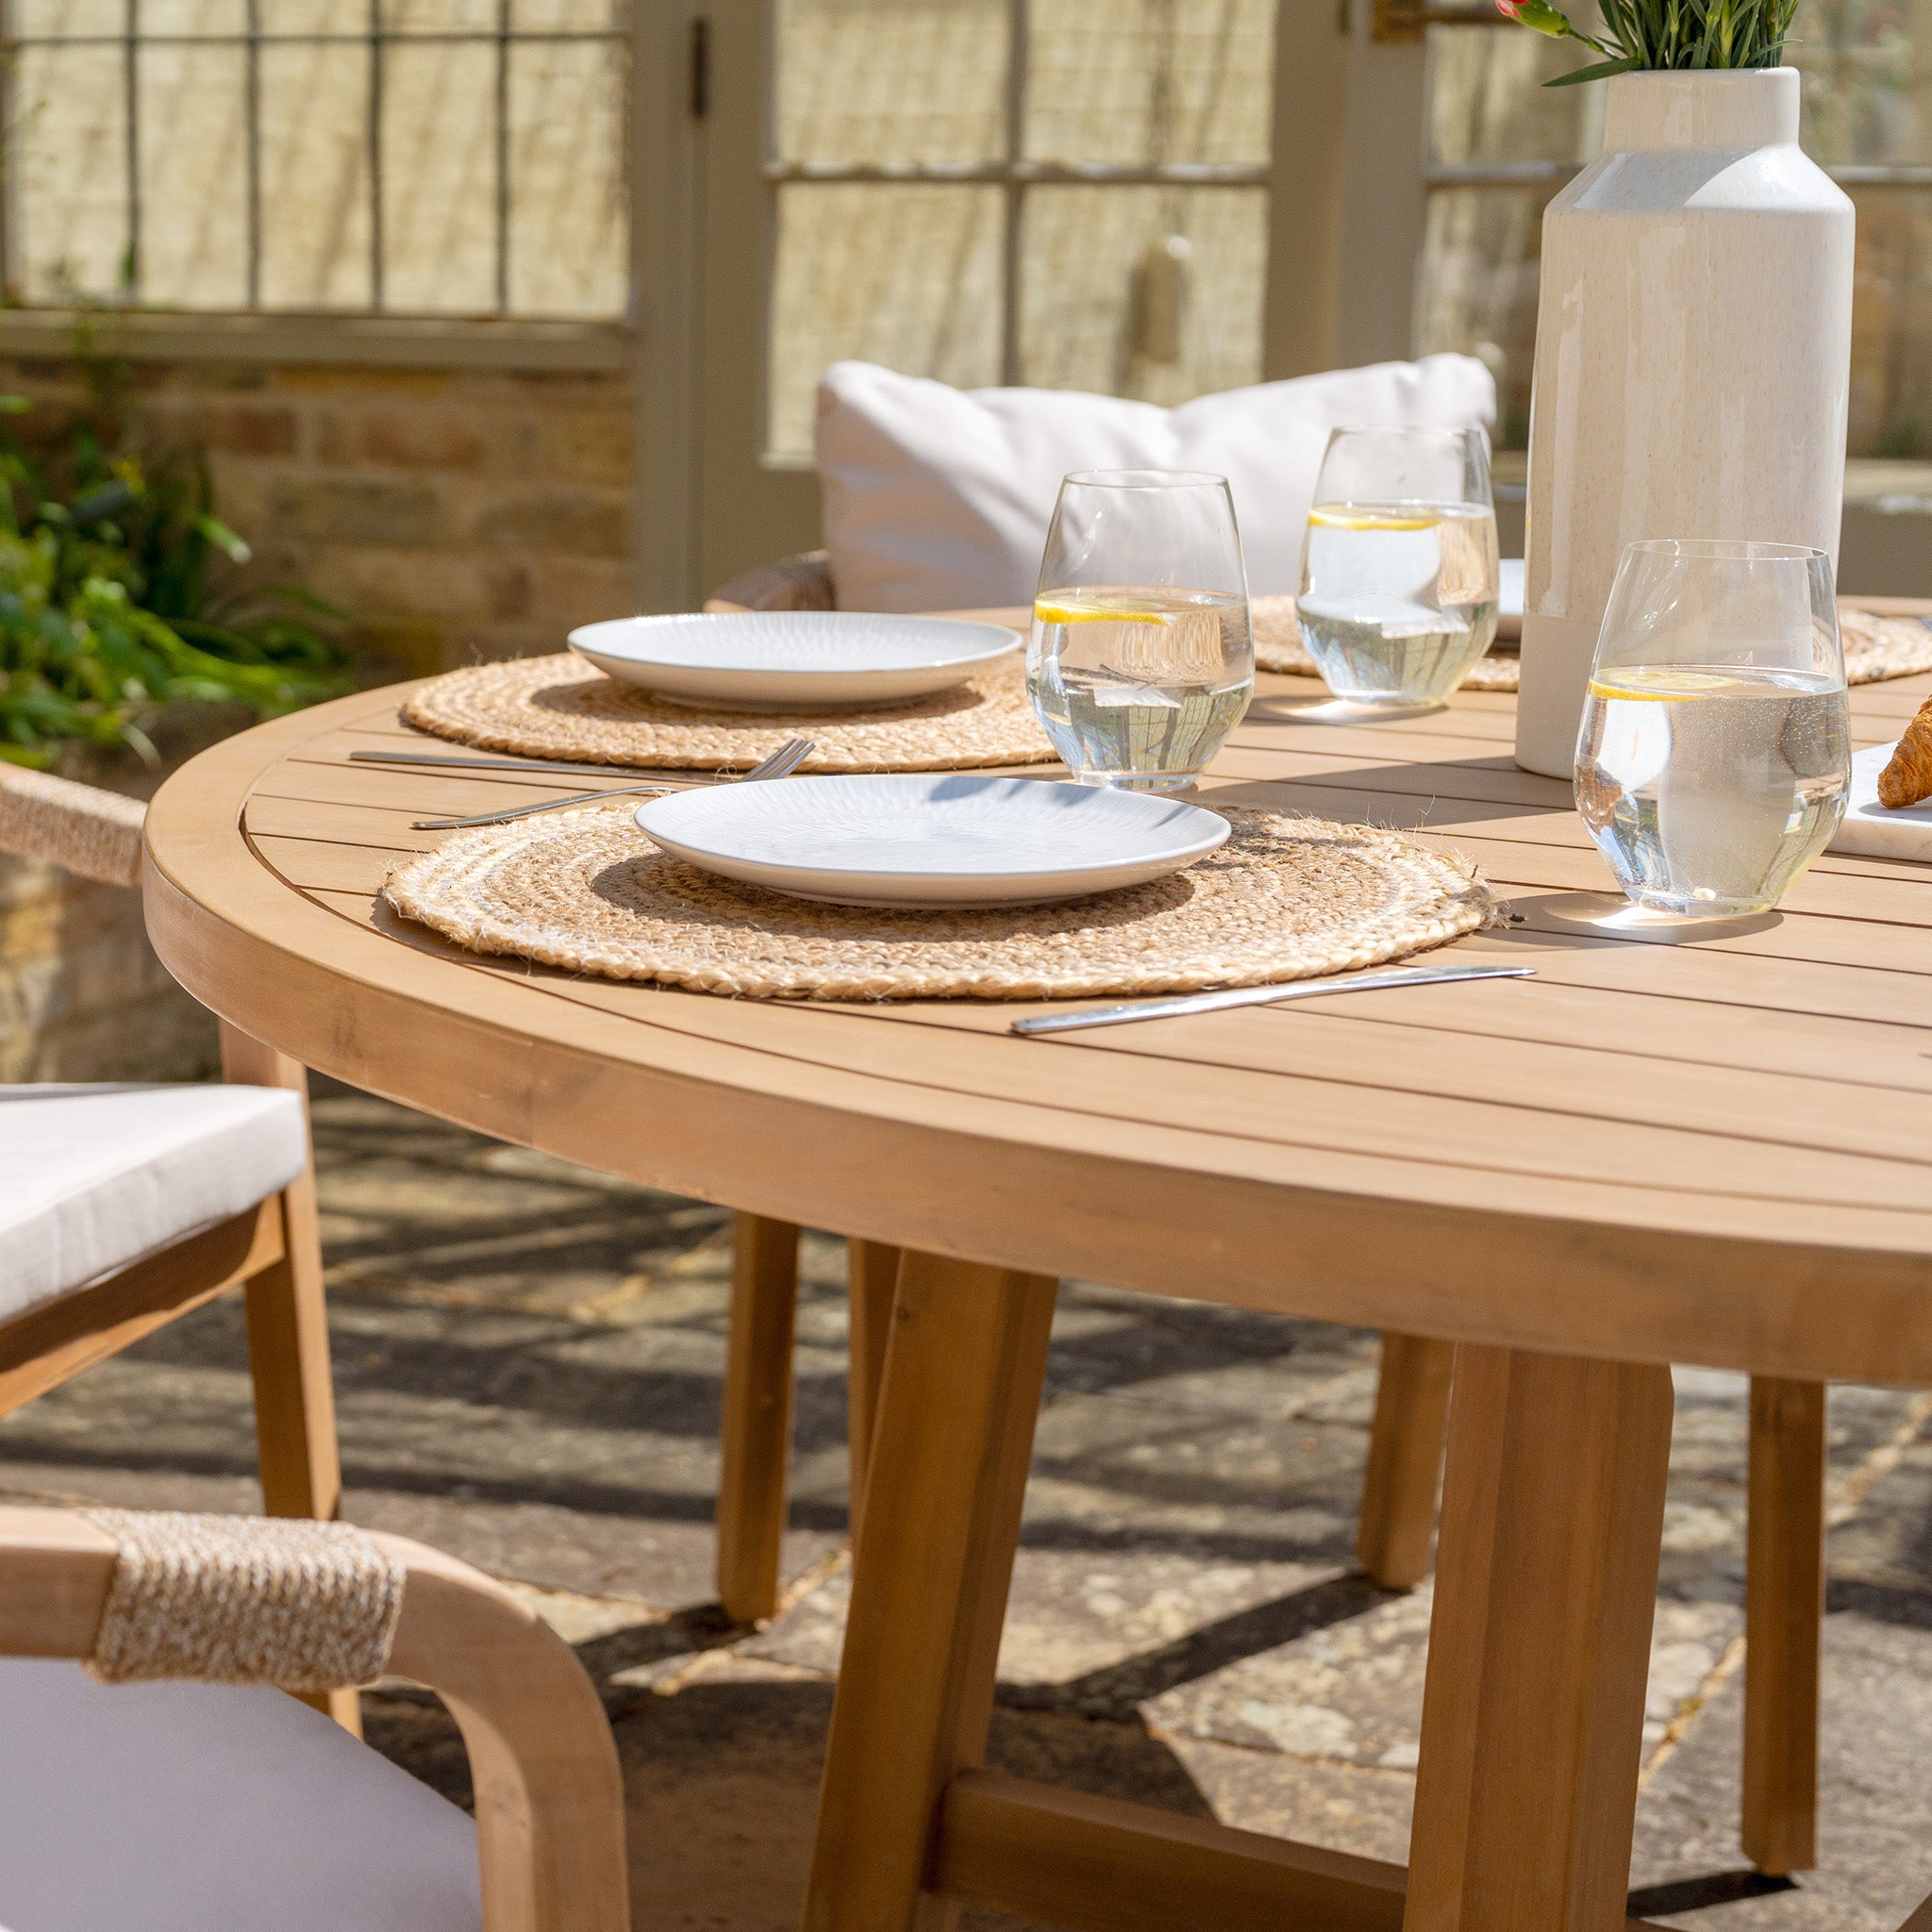 Quay 6 Seat Round Dining Set in Linen